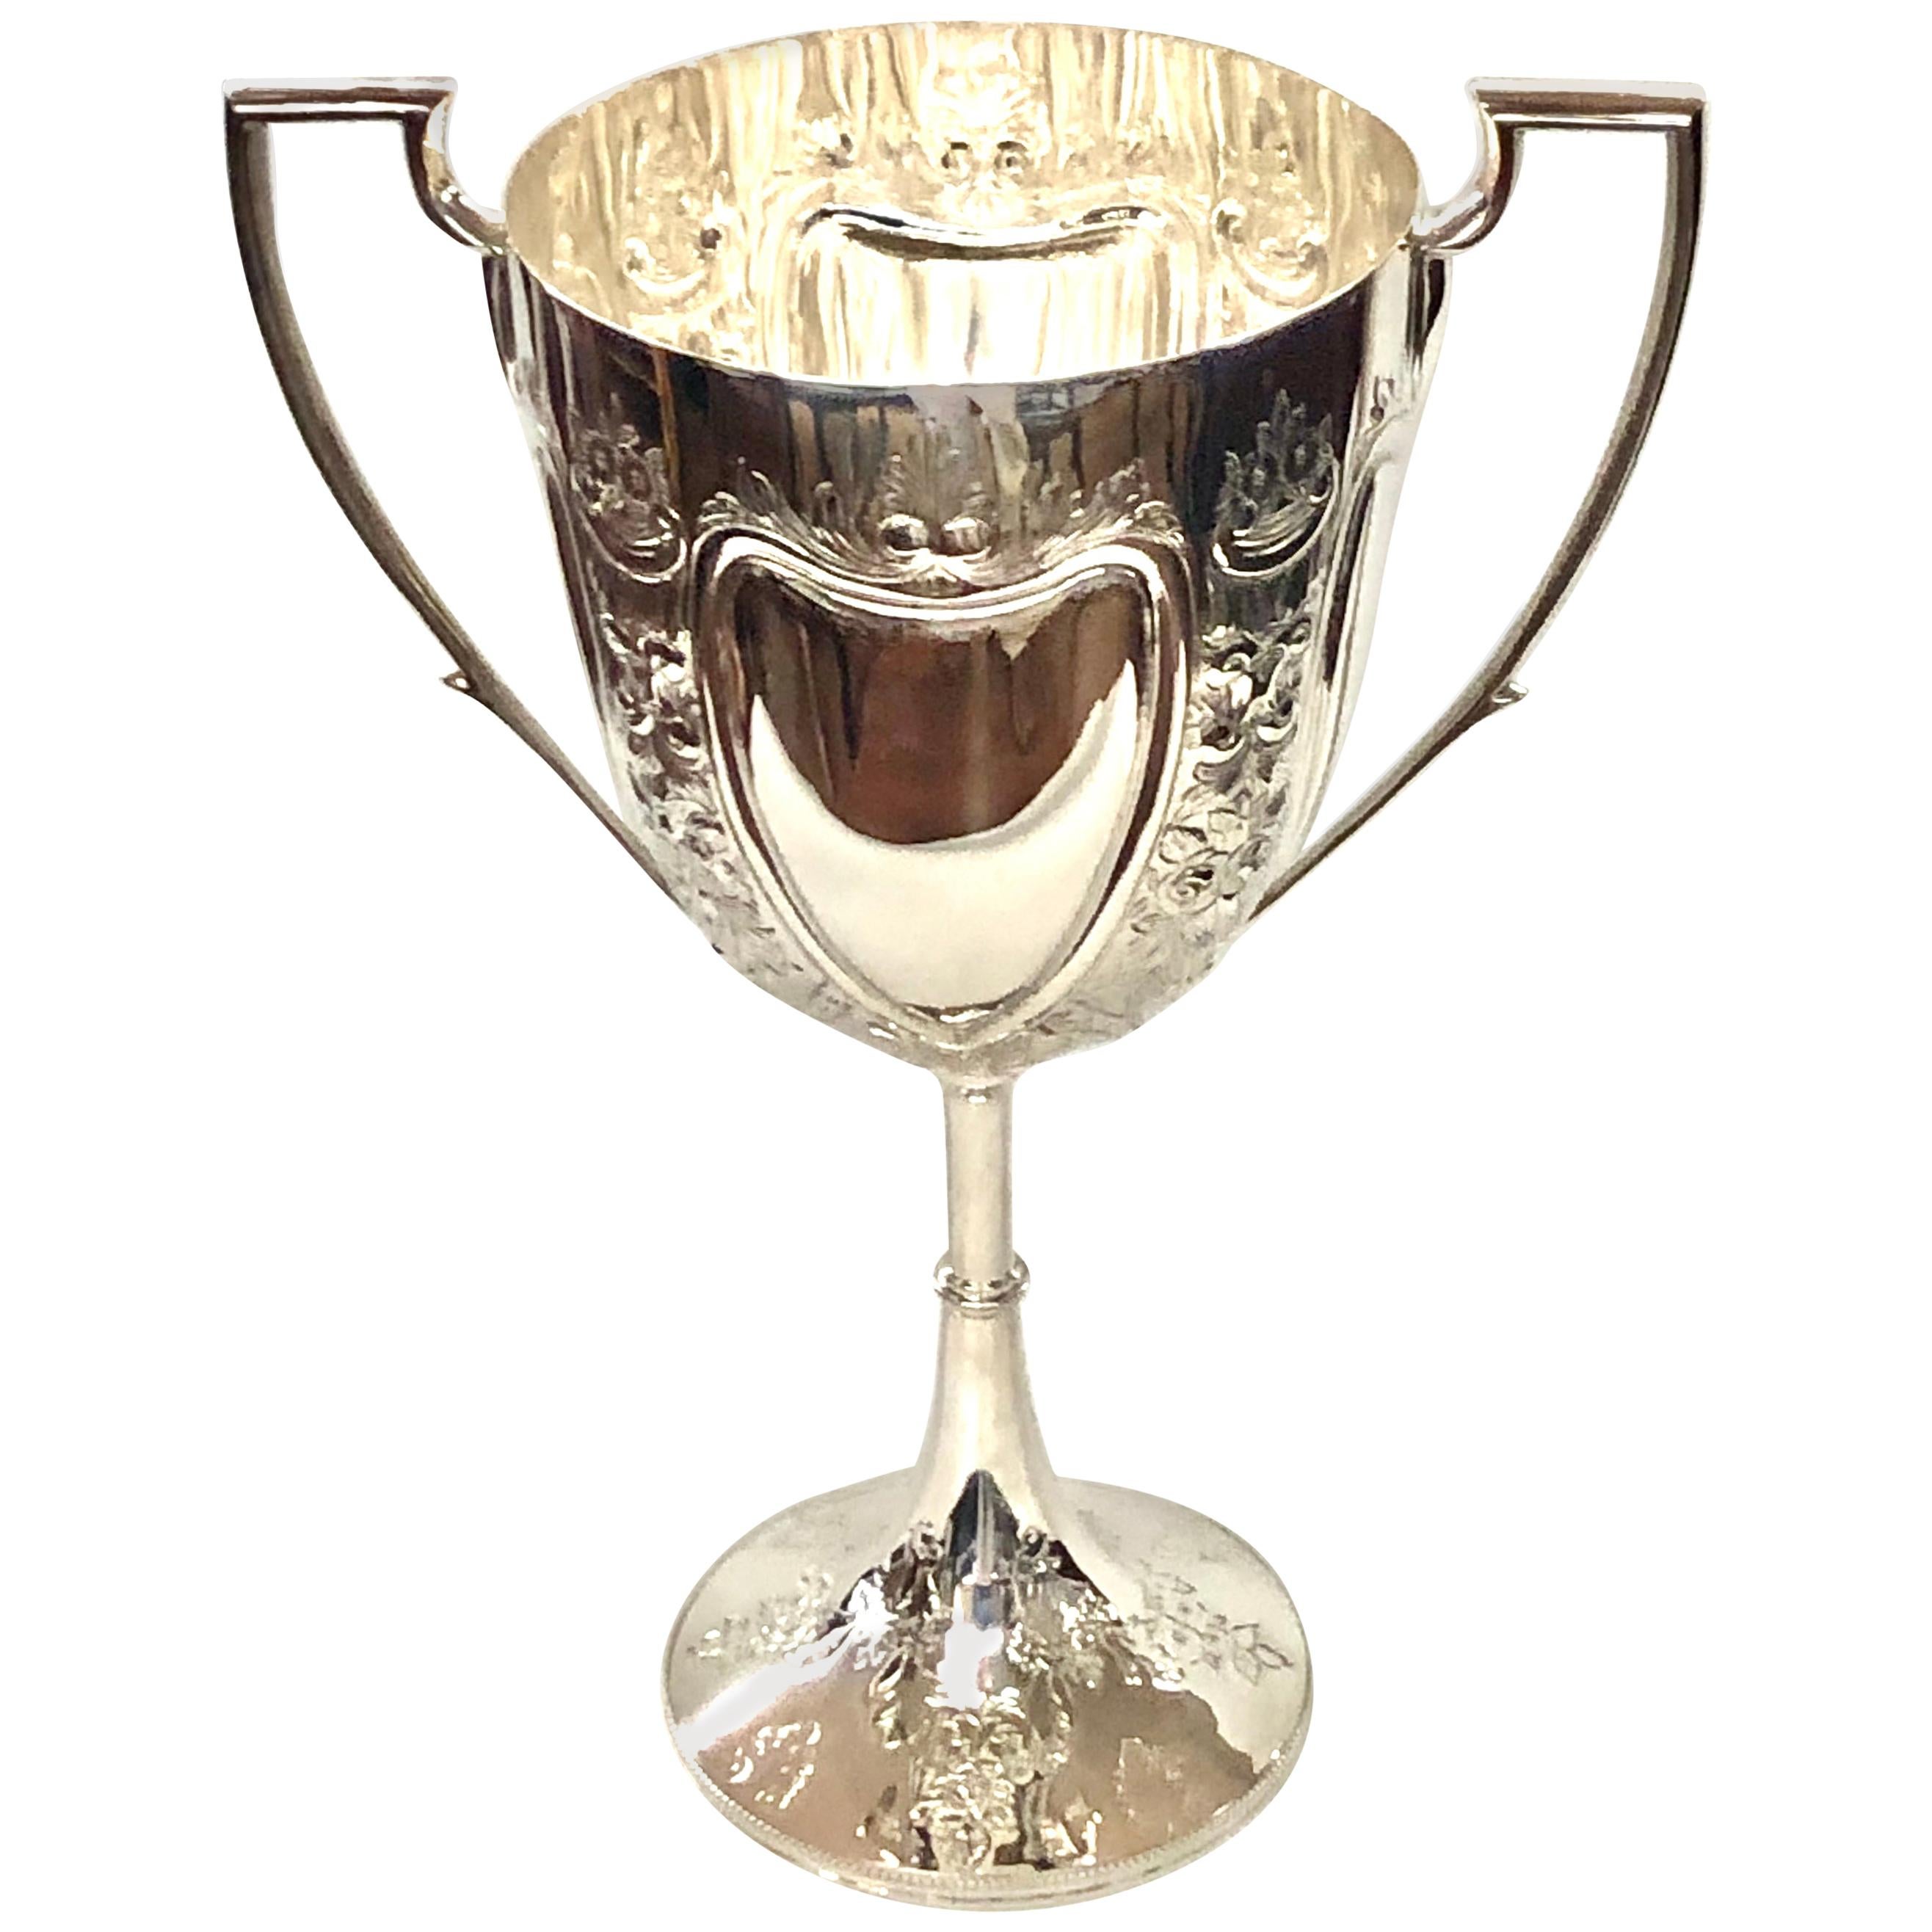 Fabulous Hand Chased English Sheffield Silver Plate Trophy or Loving Cup